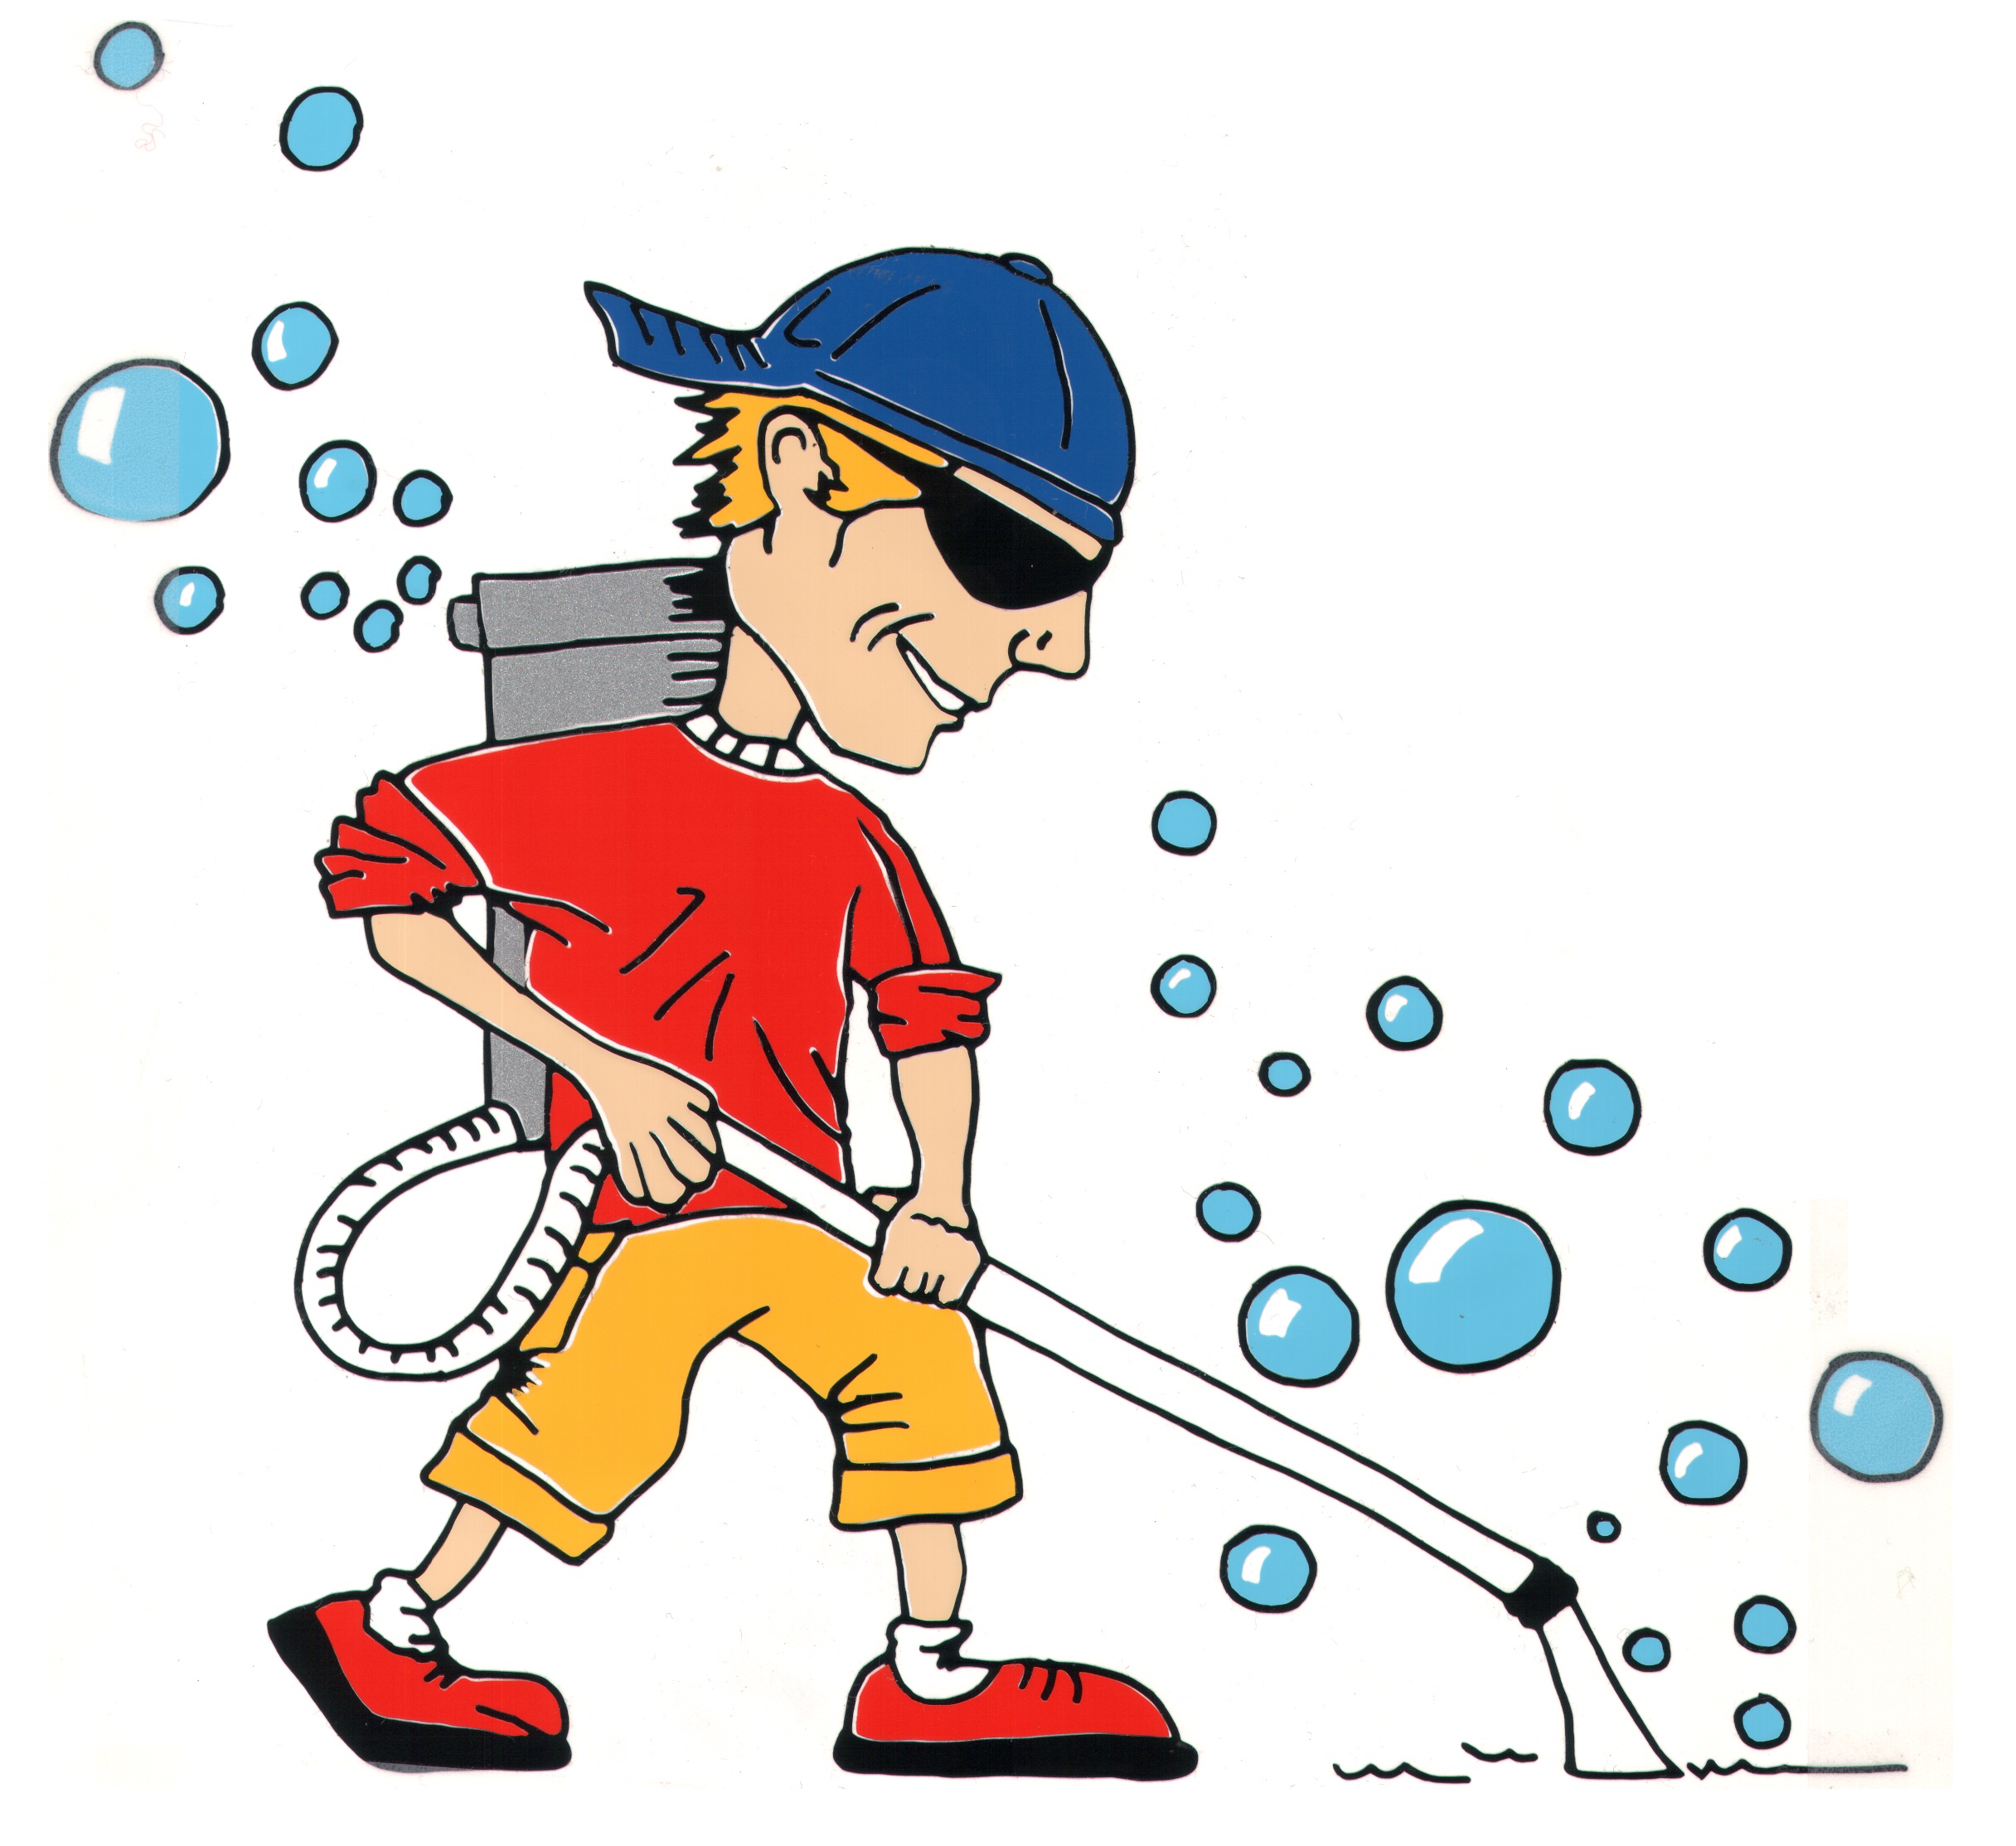 MAN,CARTOON WITH VACUUM-CLEANER & BUBBLES by Ercan Oztas - 1178472